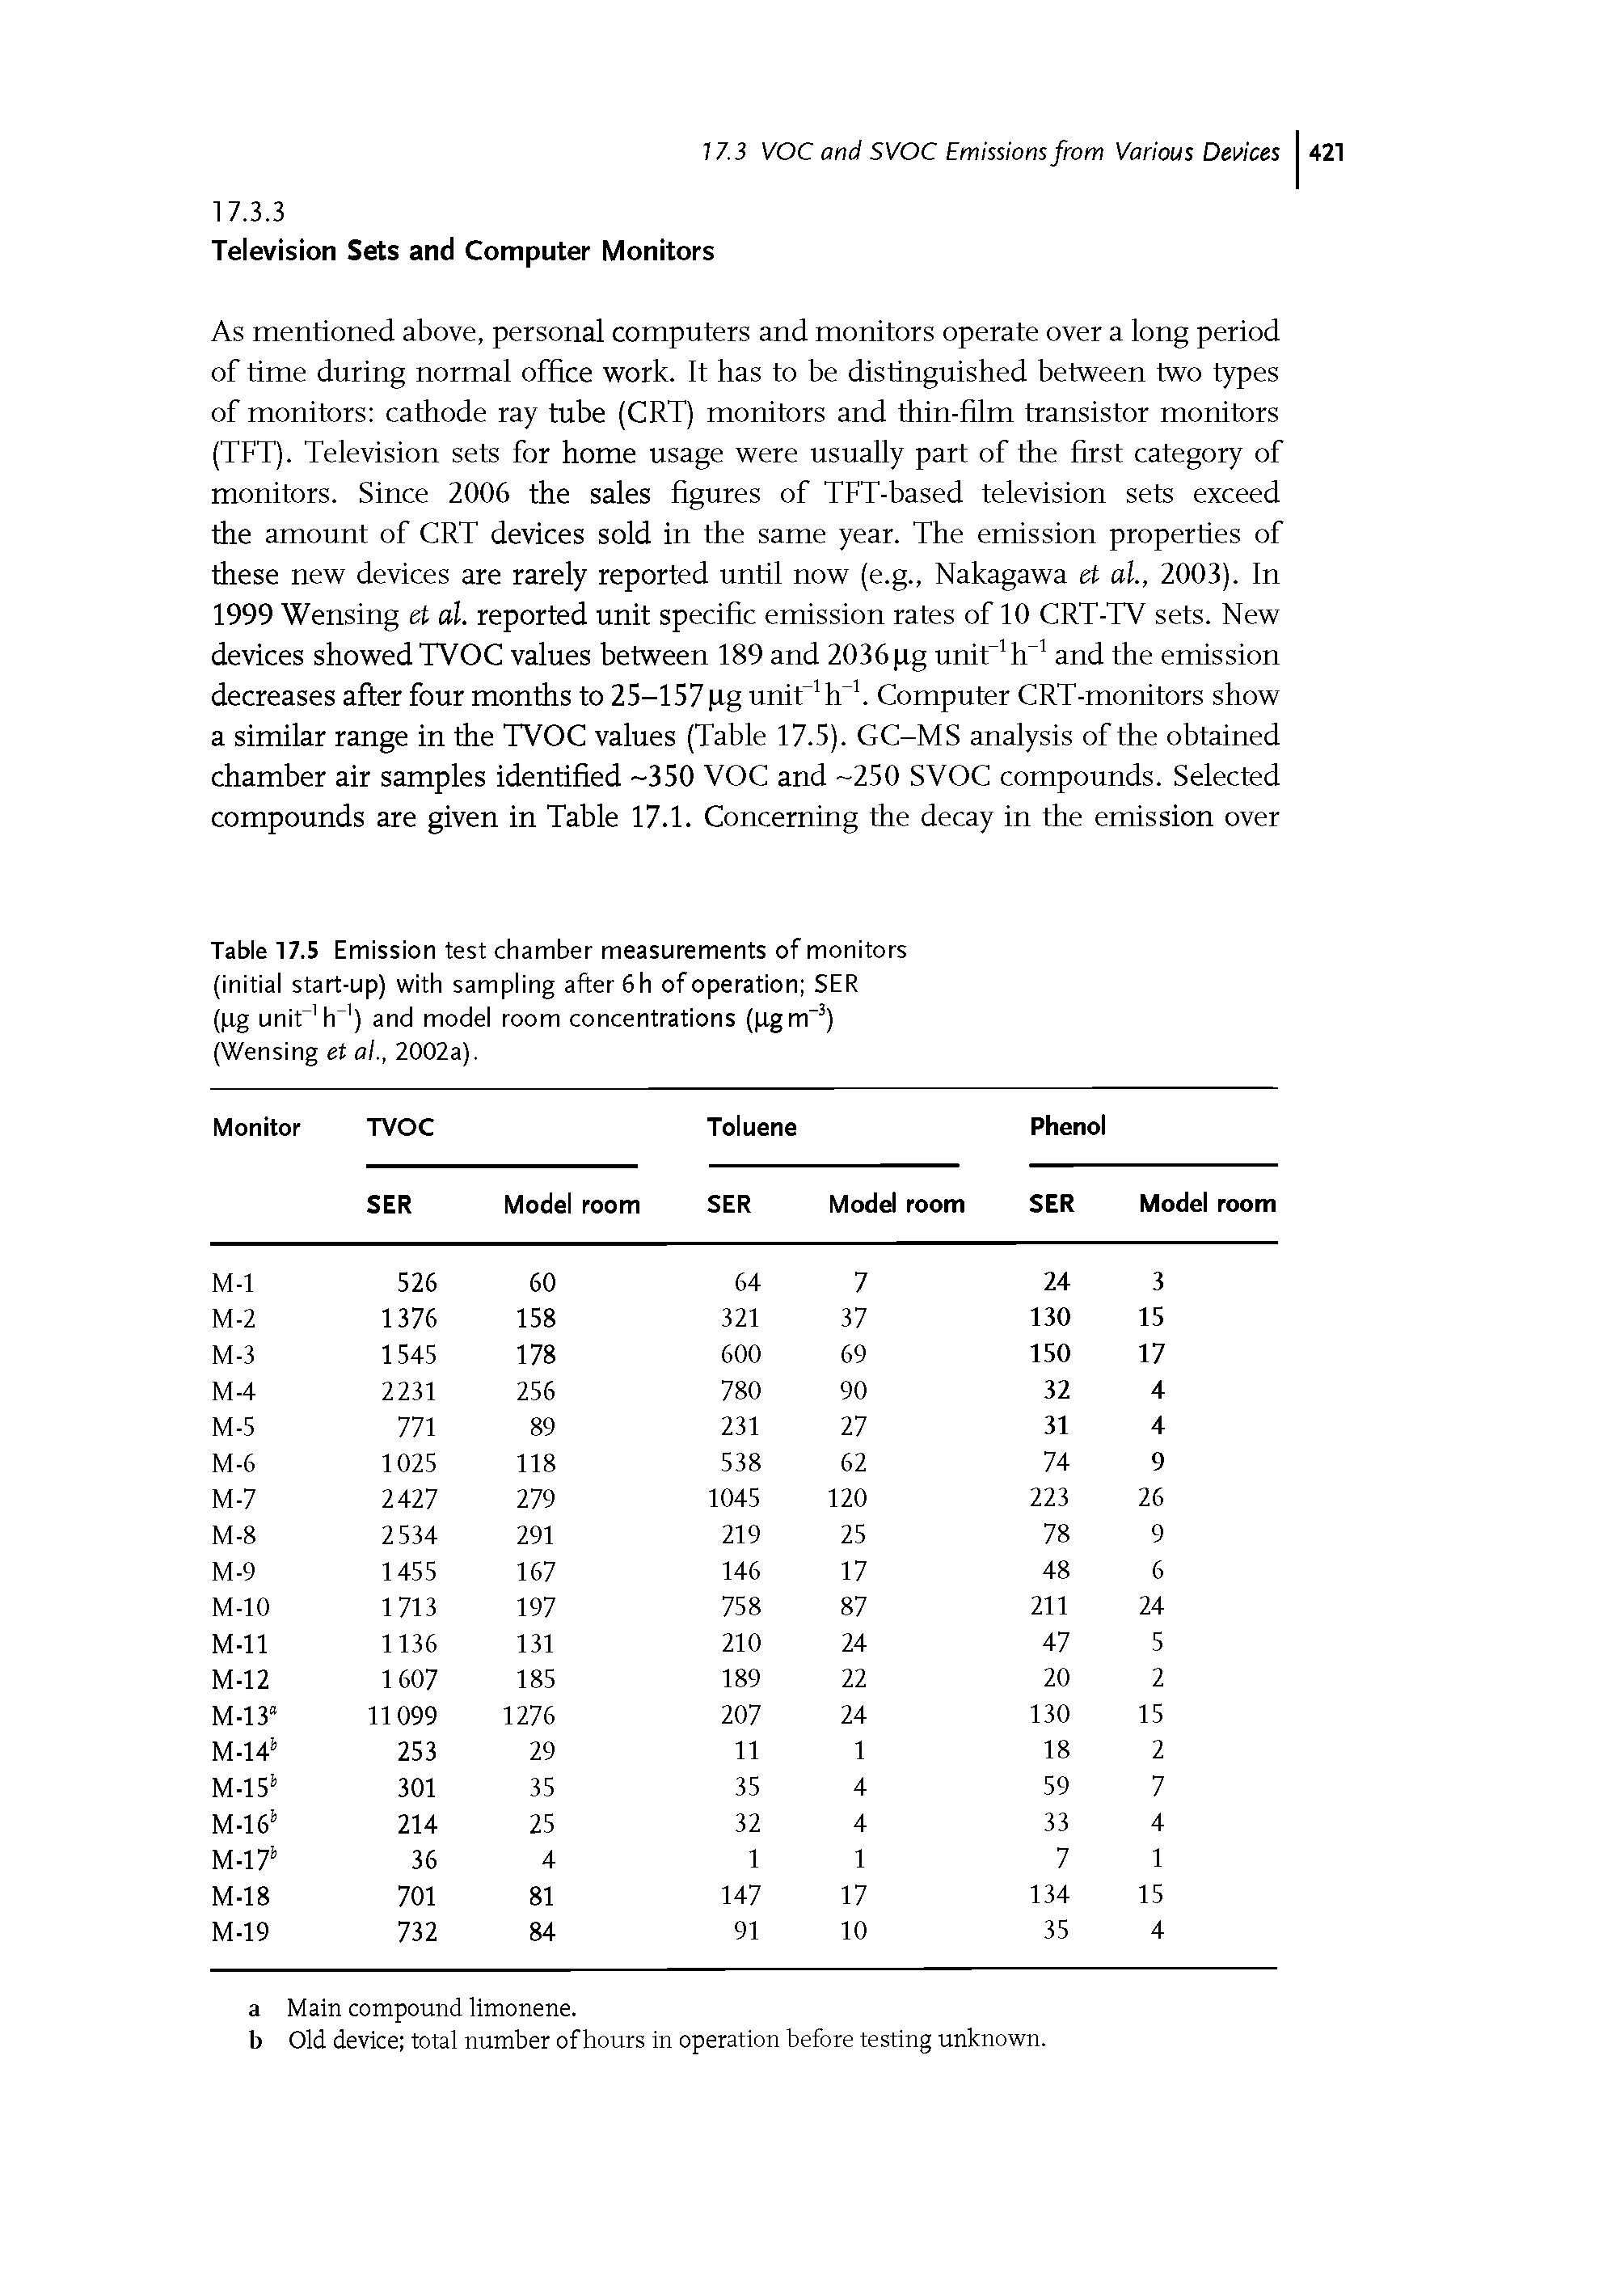 Table 17.5 Emission test chamber measurements of monitors (initial start-up) with sampling after 6 h of operation SER (pg unir tr ) and model room concentrations (pgm-3) (Wensing et al., 2002a).